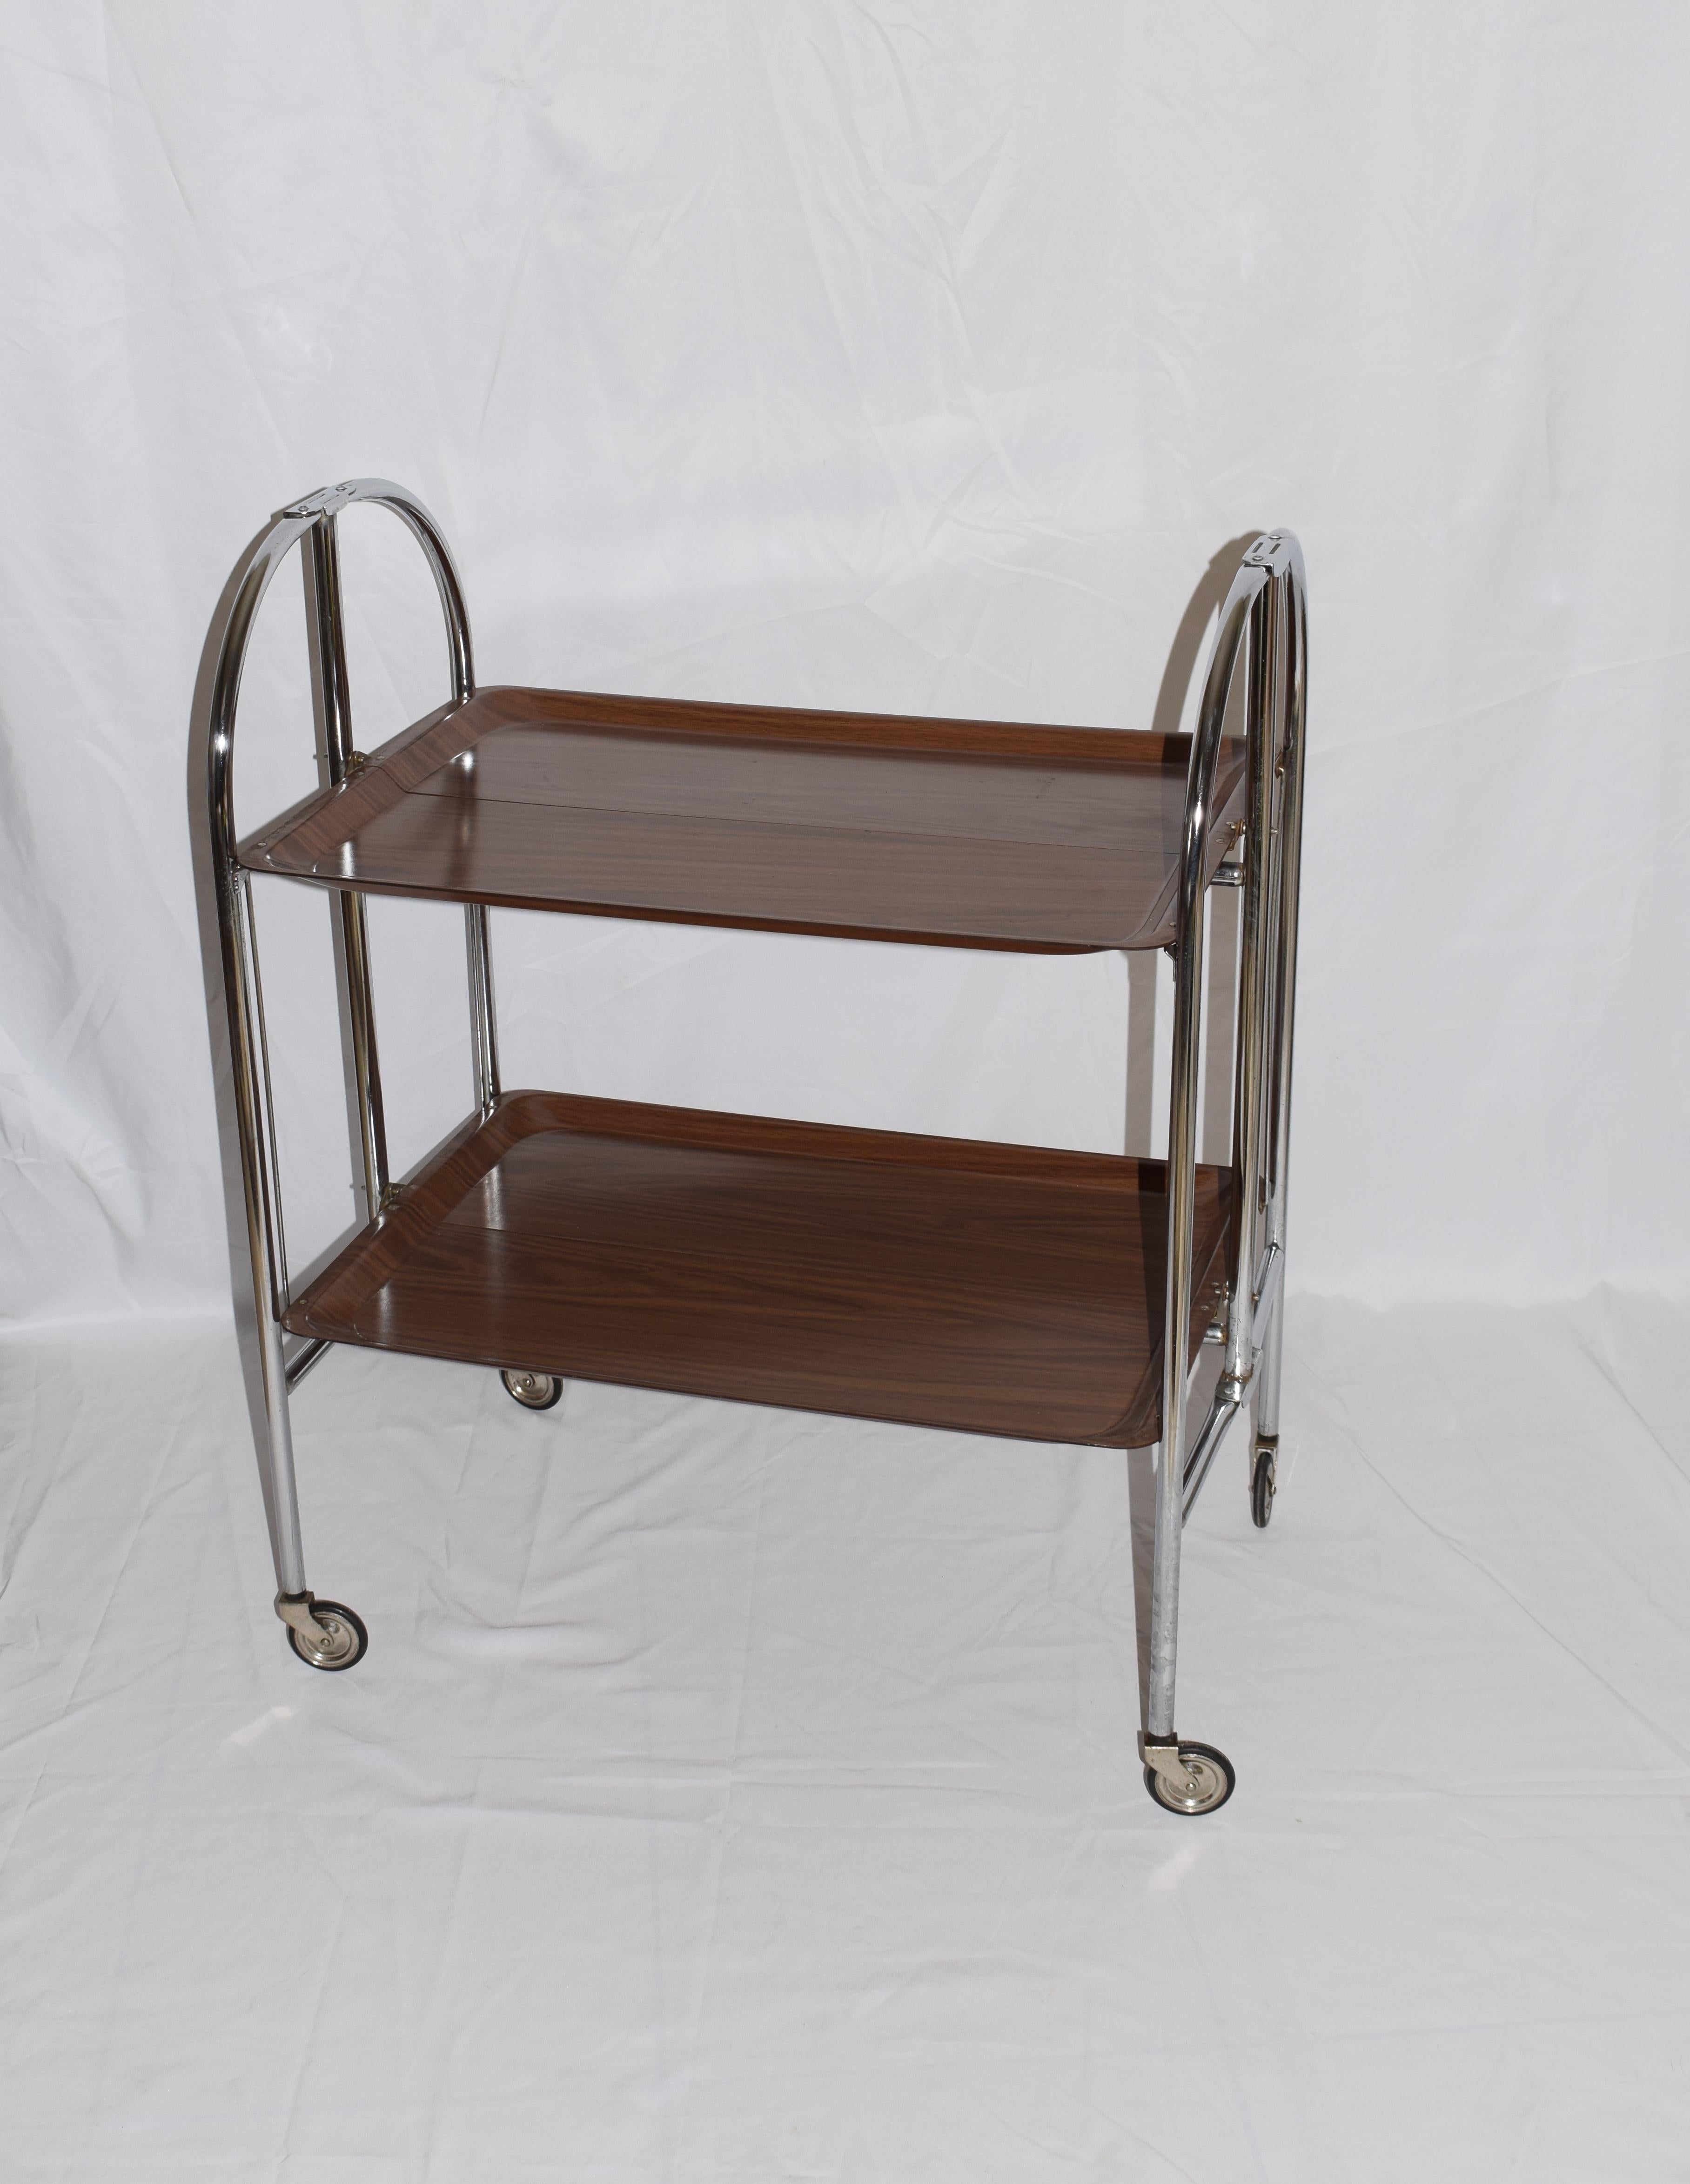 A mid-century Bremshey & Co German Dinette Trolley. Made of chrome & lamented wood. It folds into a smaller frame. Attribution mark on the wheels. Circa, 1950s

The trays are in a good condition. The chrome has a bit of rust on places but it has